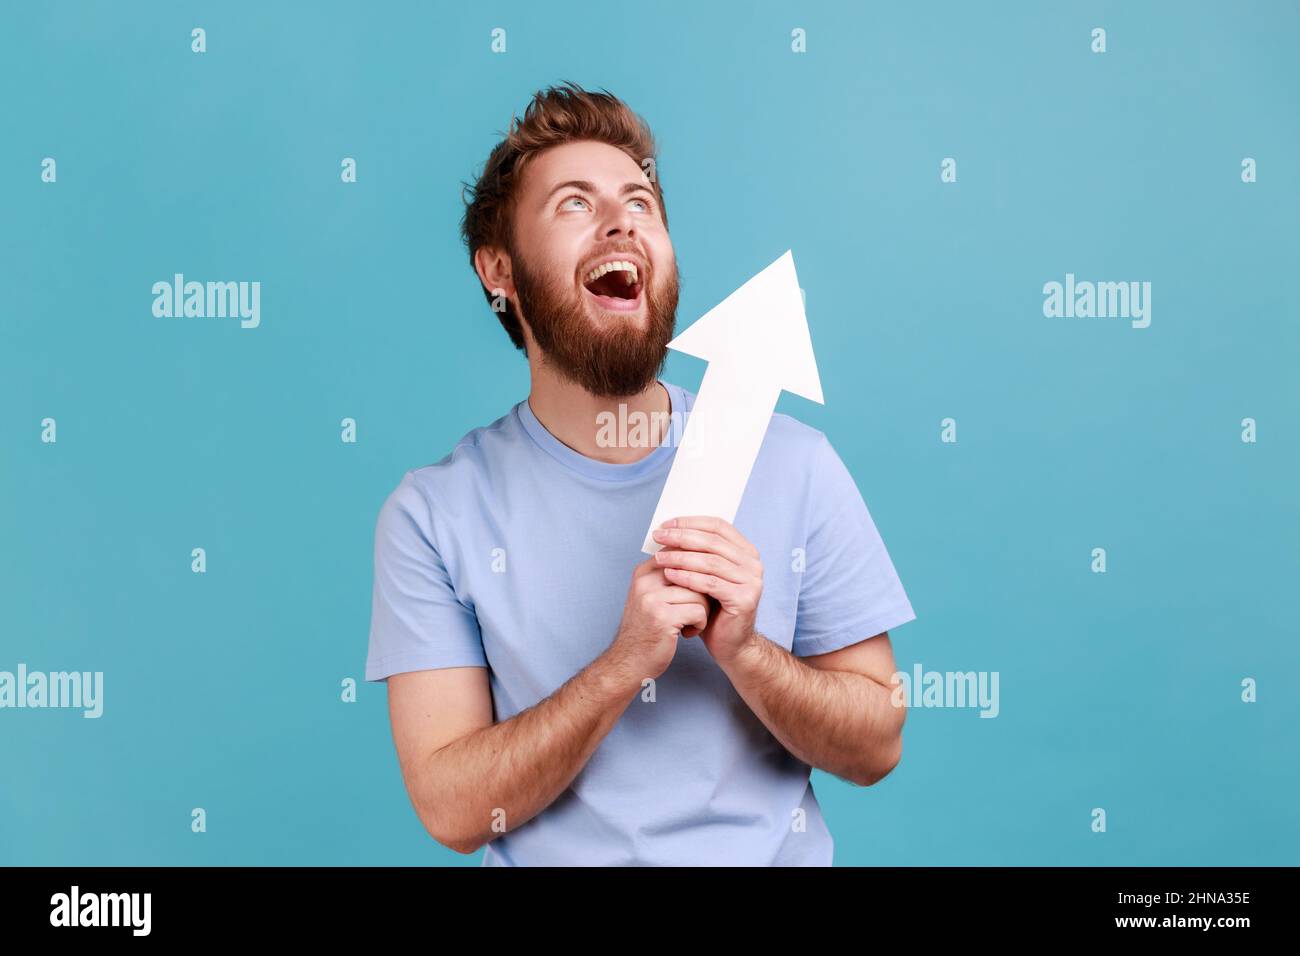 Portrait of excited positive optimistic bearded man holding arrow pointing up looking at camera with smile, growth and increase concept. Indoor studio shot isolated on blue background. Stock Photo